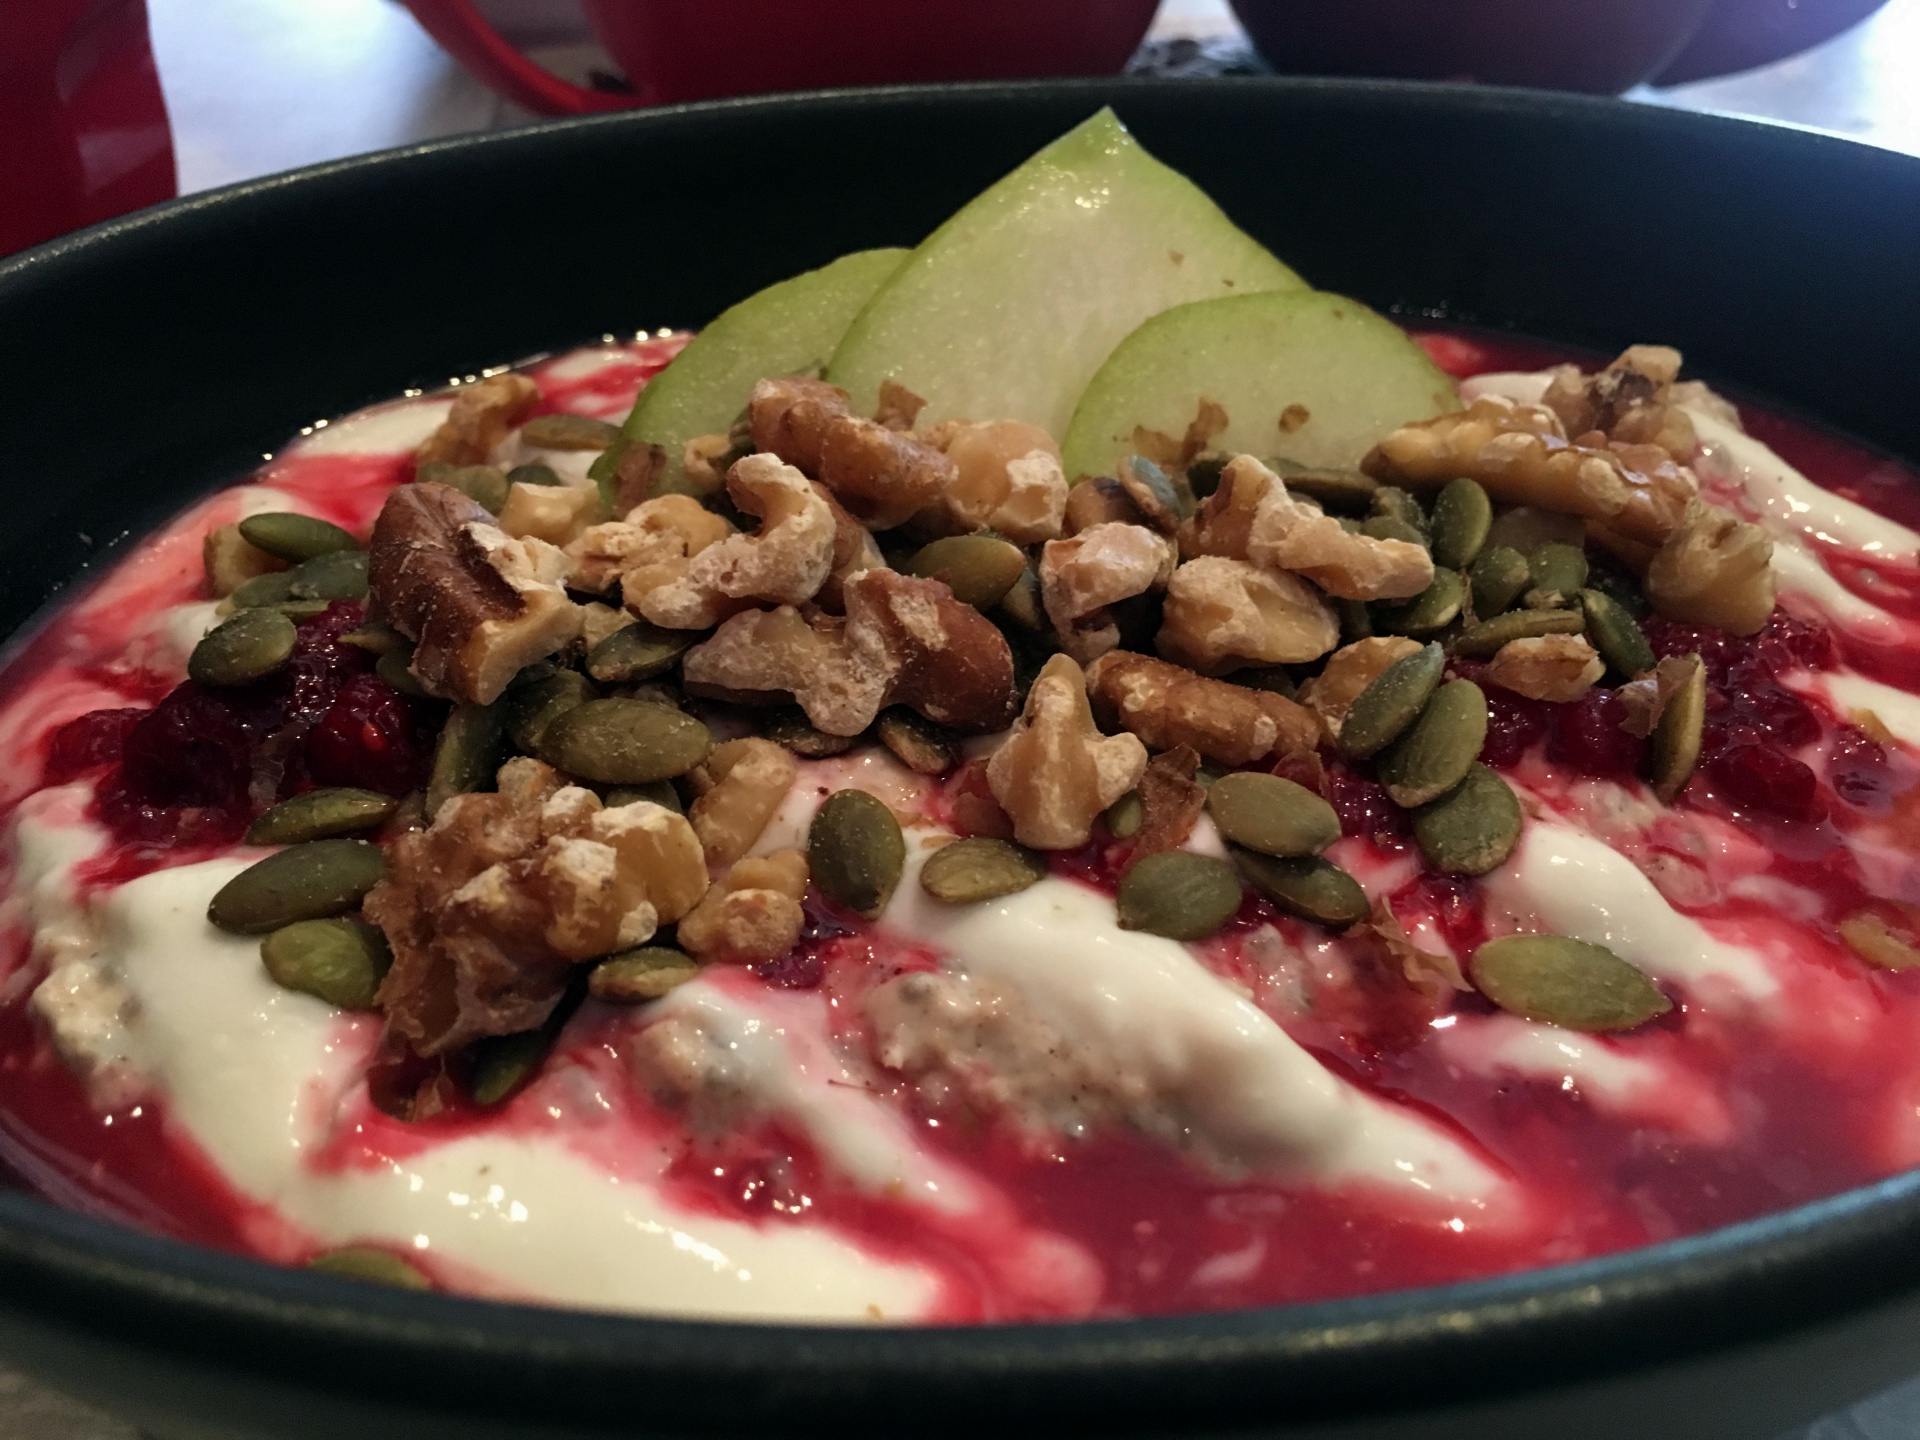 His: Bircher Muesli with Fruit, Chia Seeds, Pear, Walnuts, and Pepitas